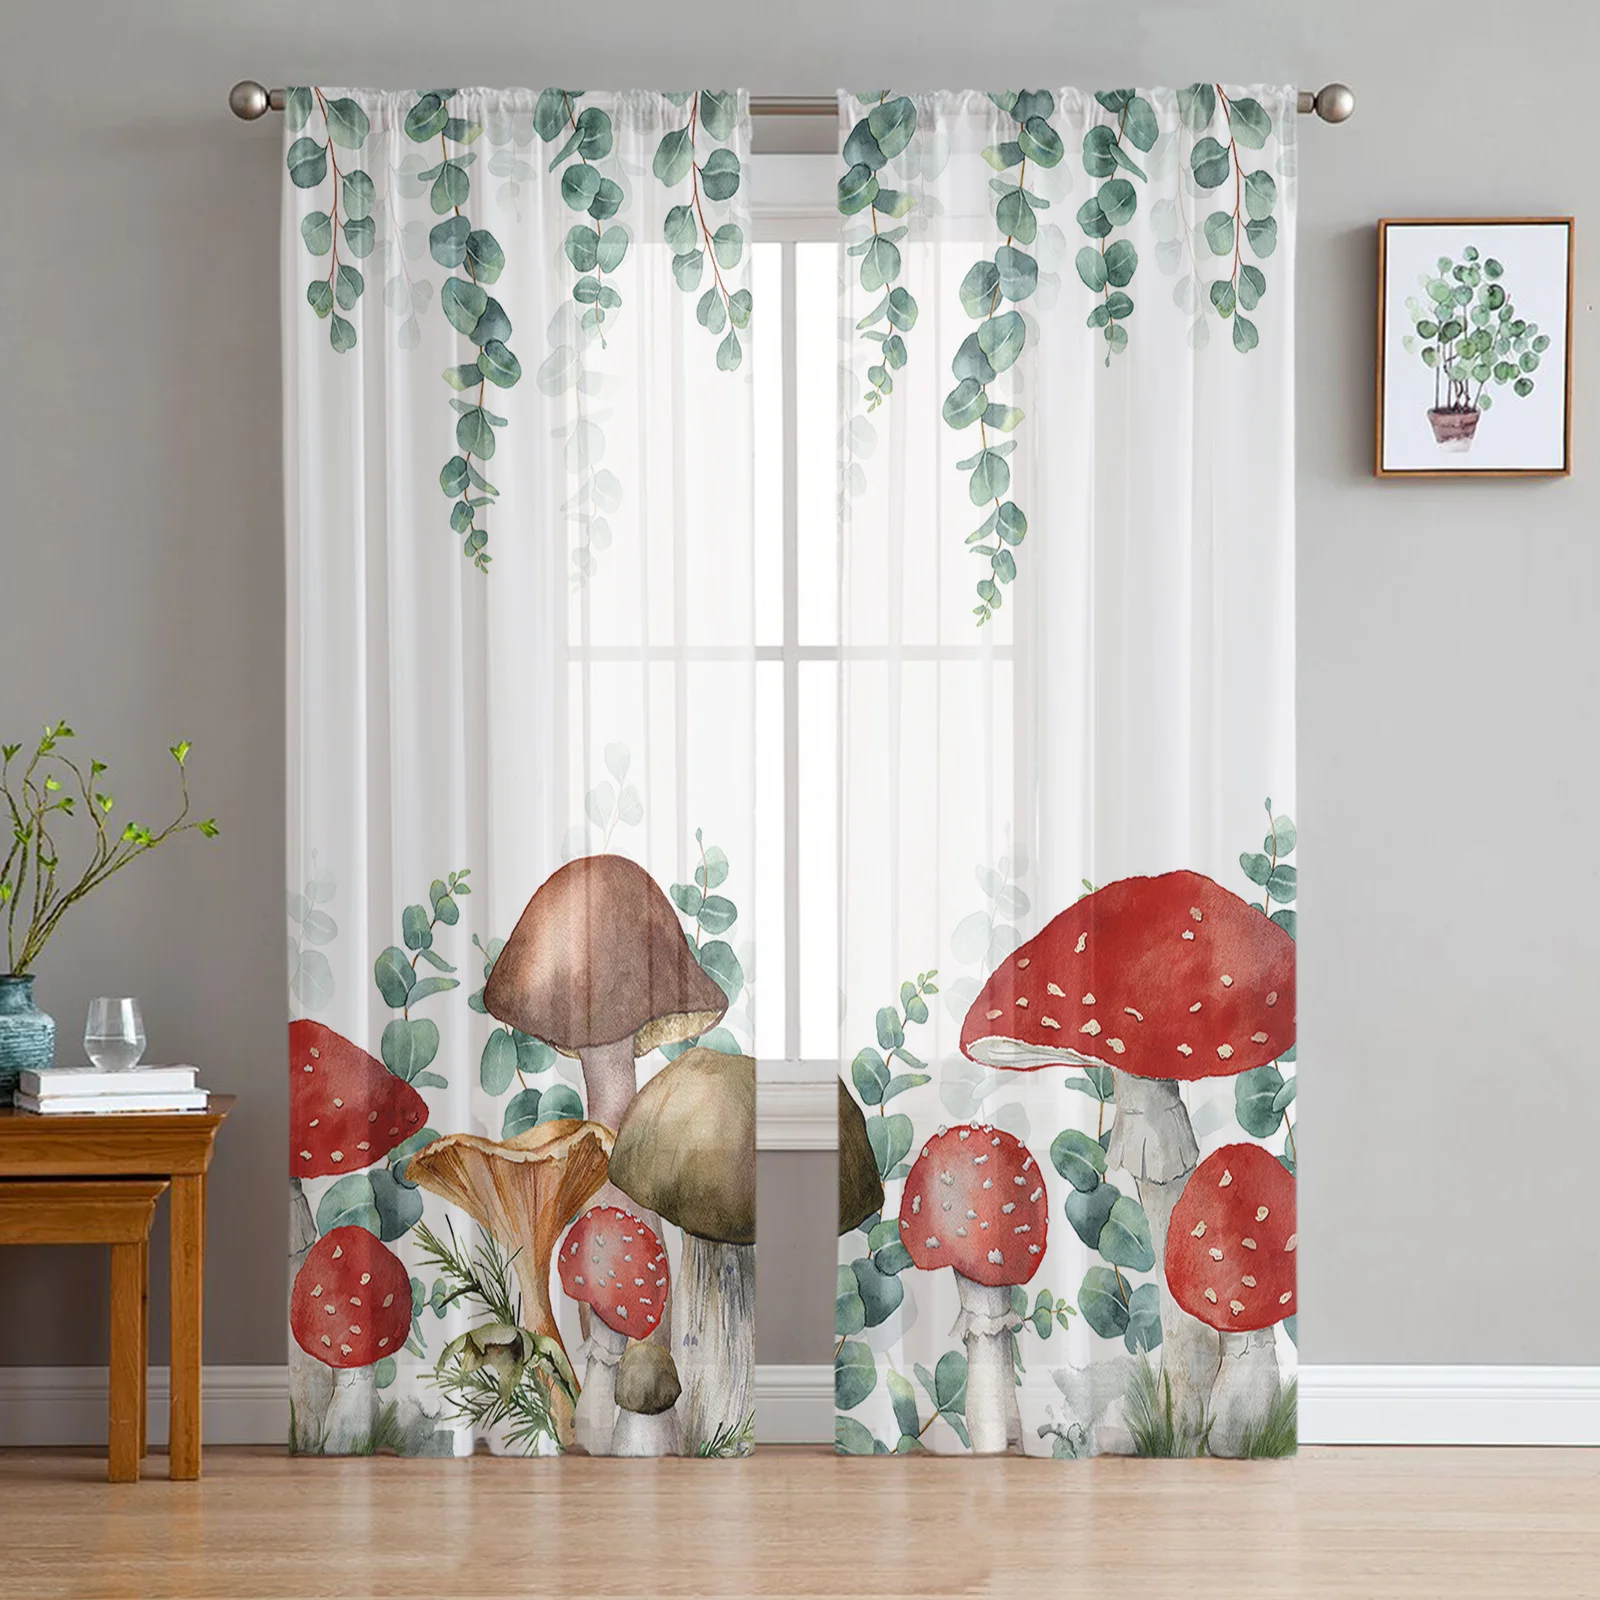 

Lentinus Edodes Eucalyptus Plant Tulle Voile Curtains For Bedroom Window Curtain For Living Room Sheer Curtains Organza Drapes